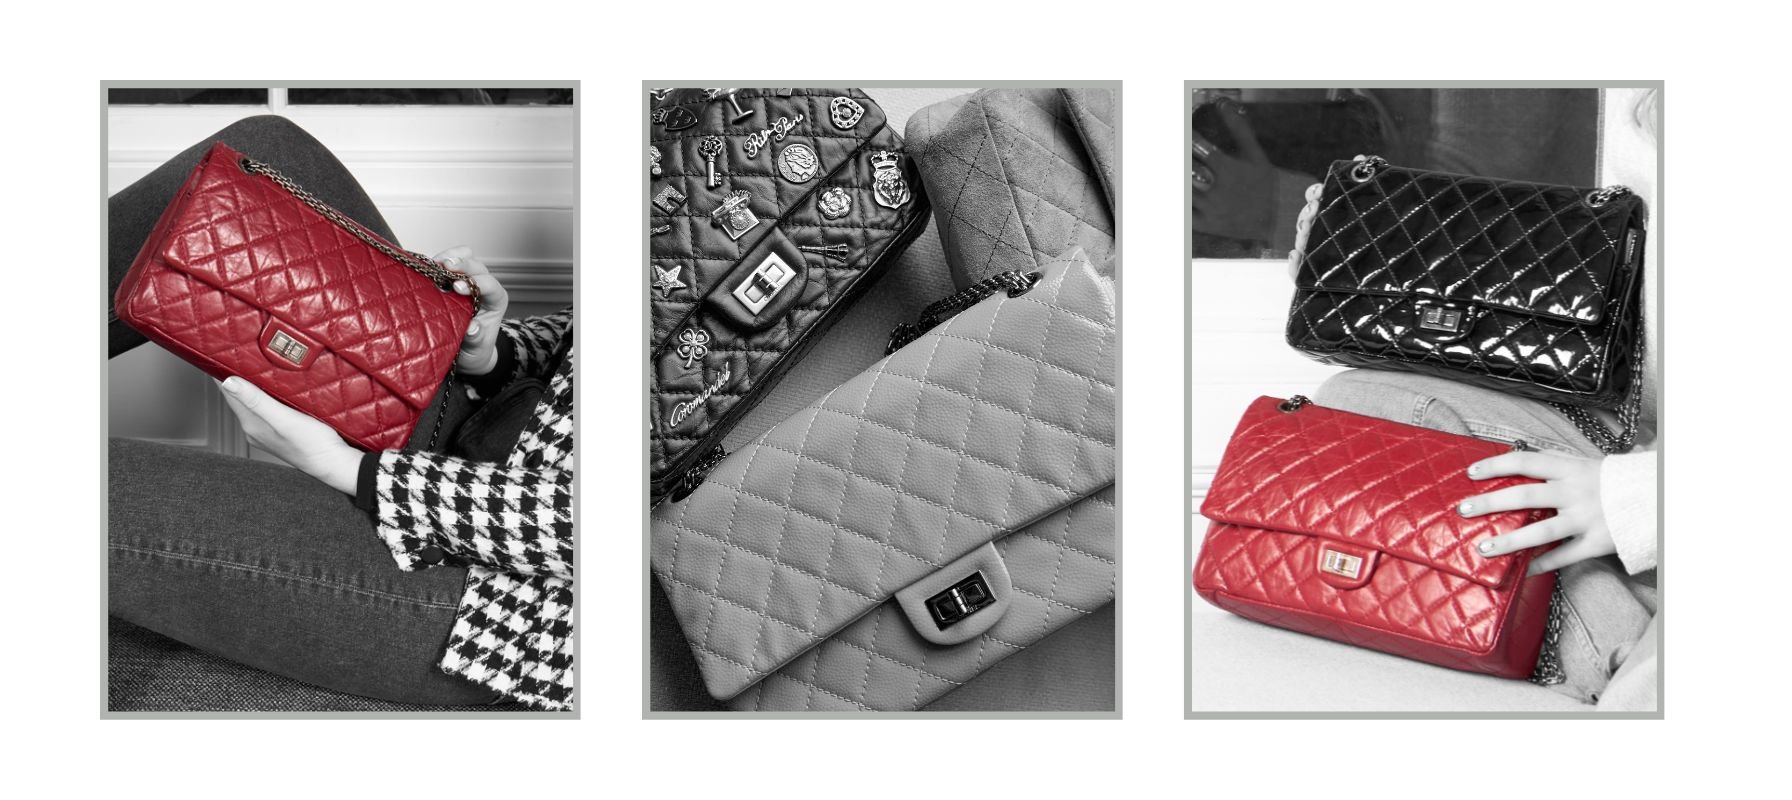 Chanel bags available at The Handbag Clinic